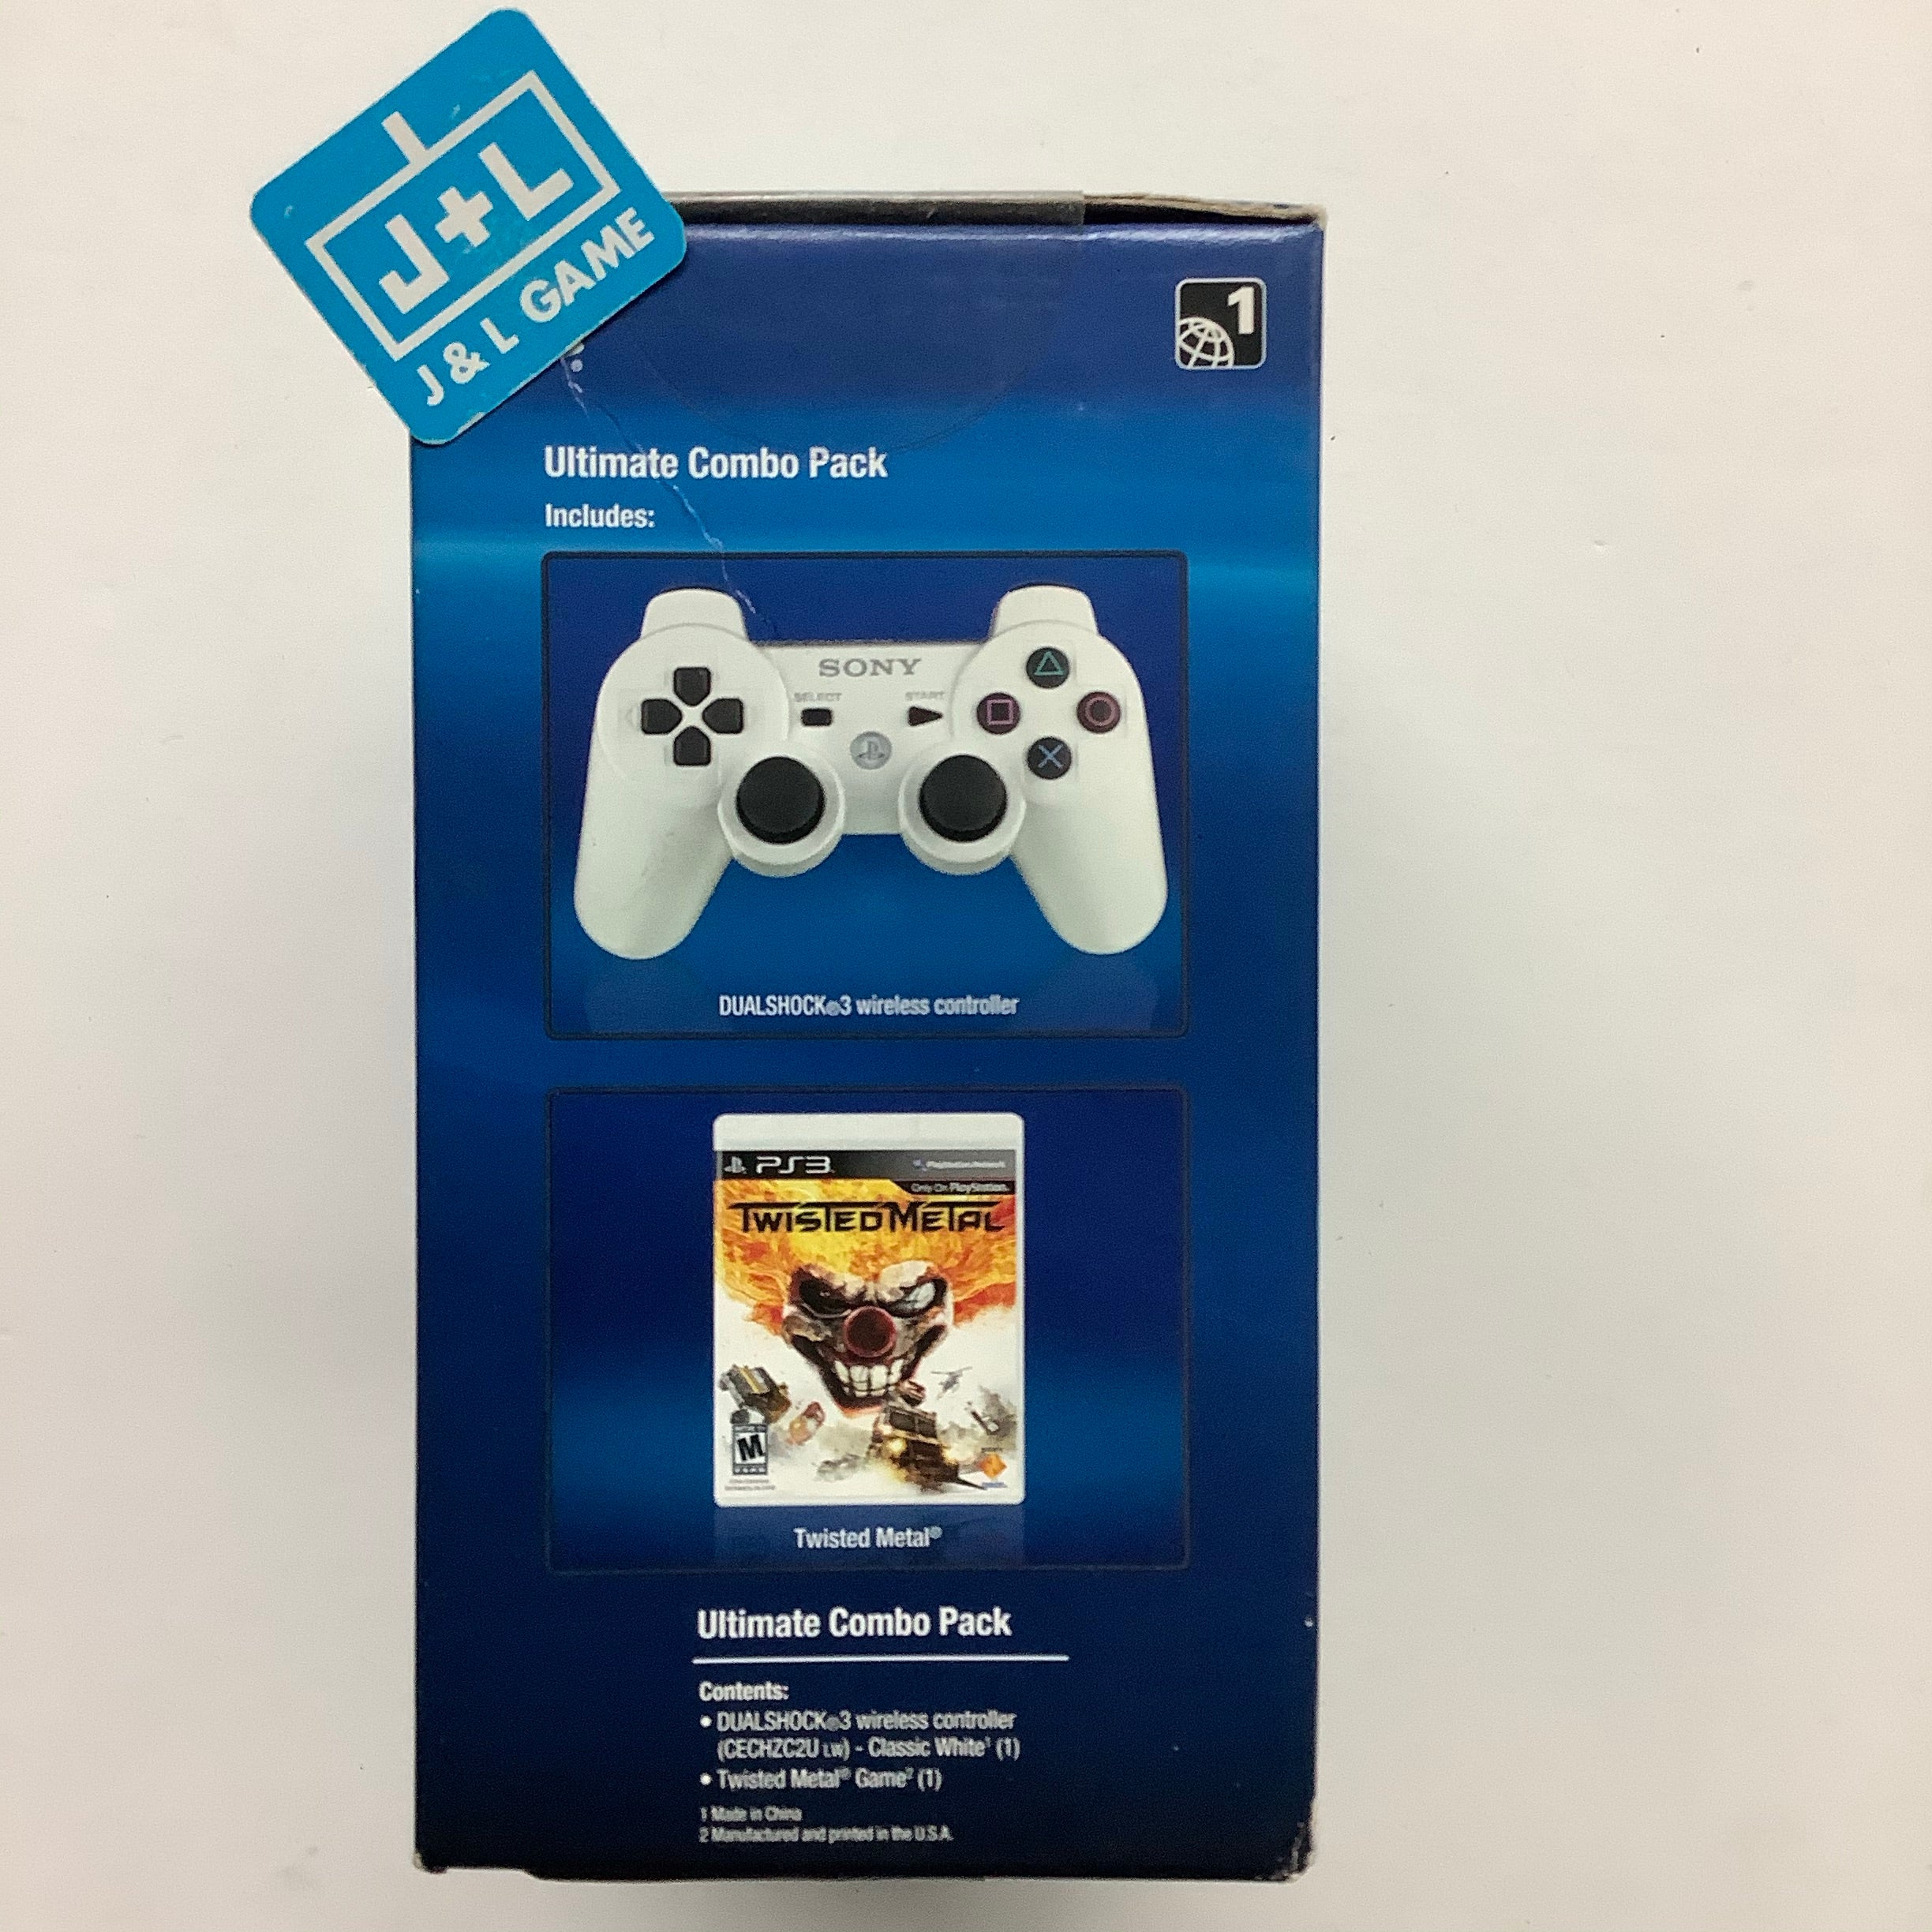 SONY Playstation 3 Twisted Metal & DUALSHOCK3 Wireless Controller - (PS3) Playstation 3 (Ultimate Combo Pack) Video Games PlayStation   